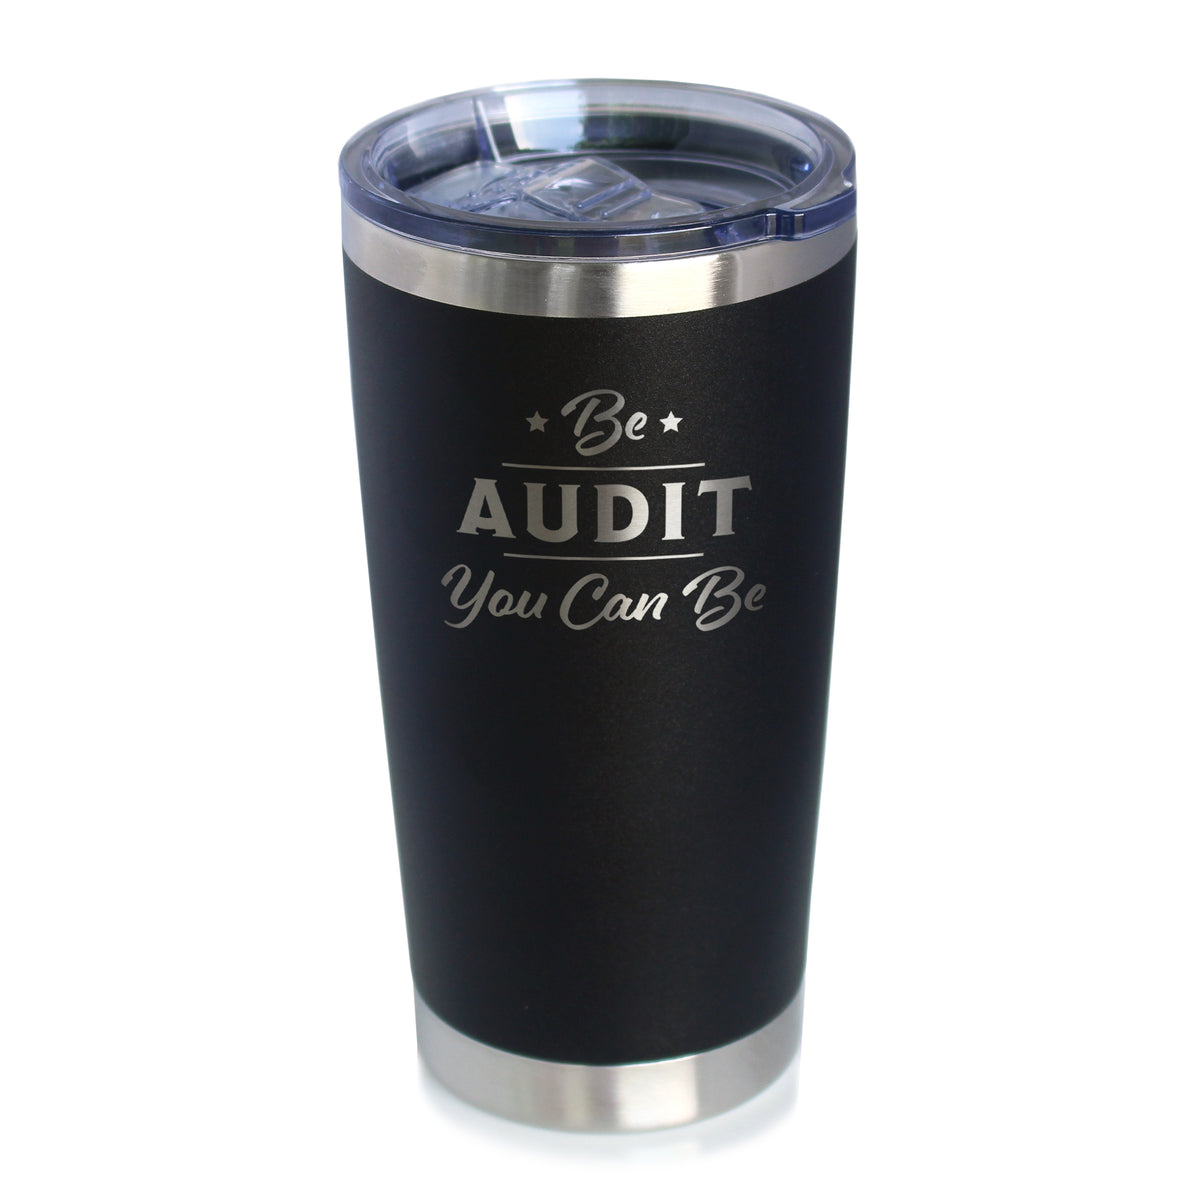 Be Audit You Can Be - Insulated Coffee Tumbler Cup with Sliding Lid - Stainless Steel Travel Mug - Unique Accounting Gifts for Accountants